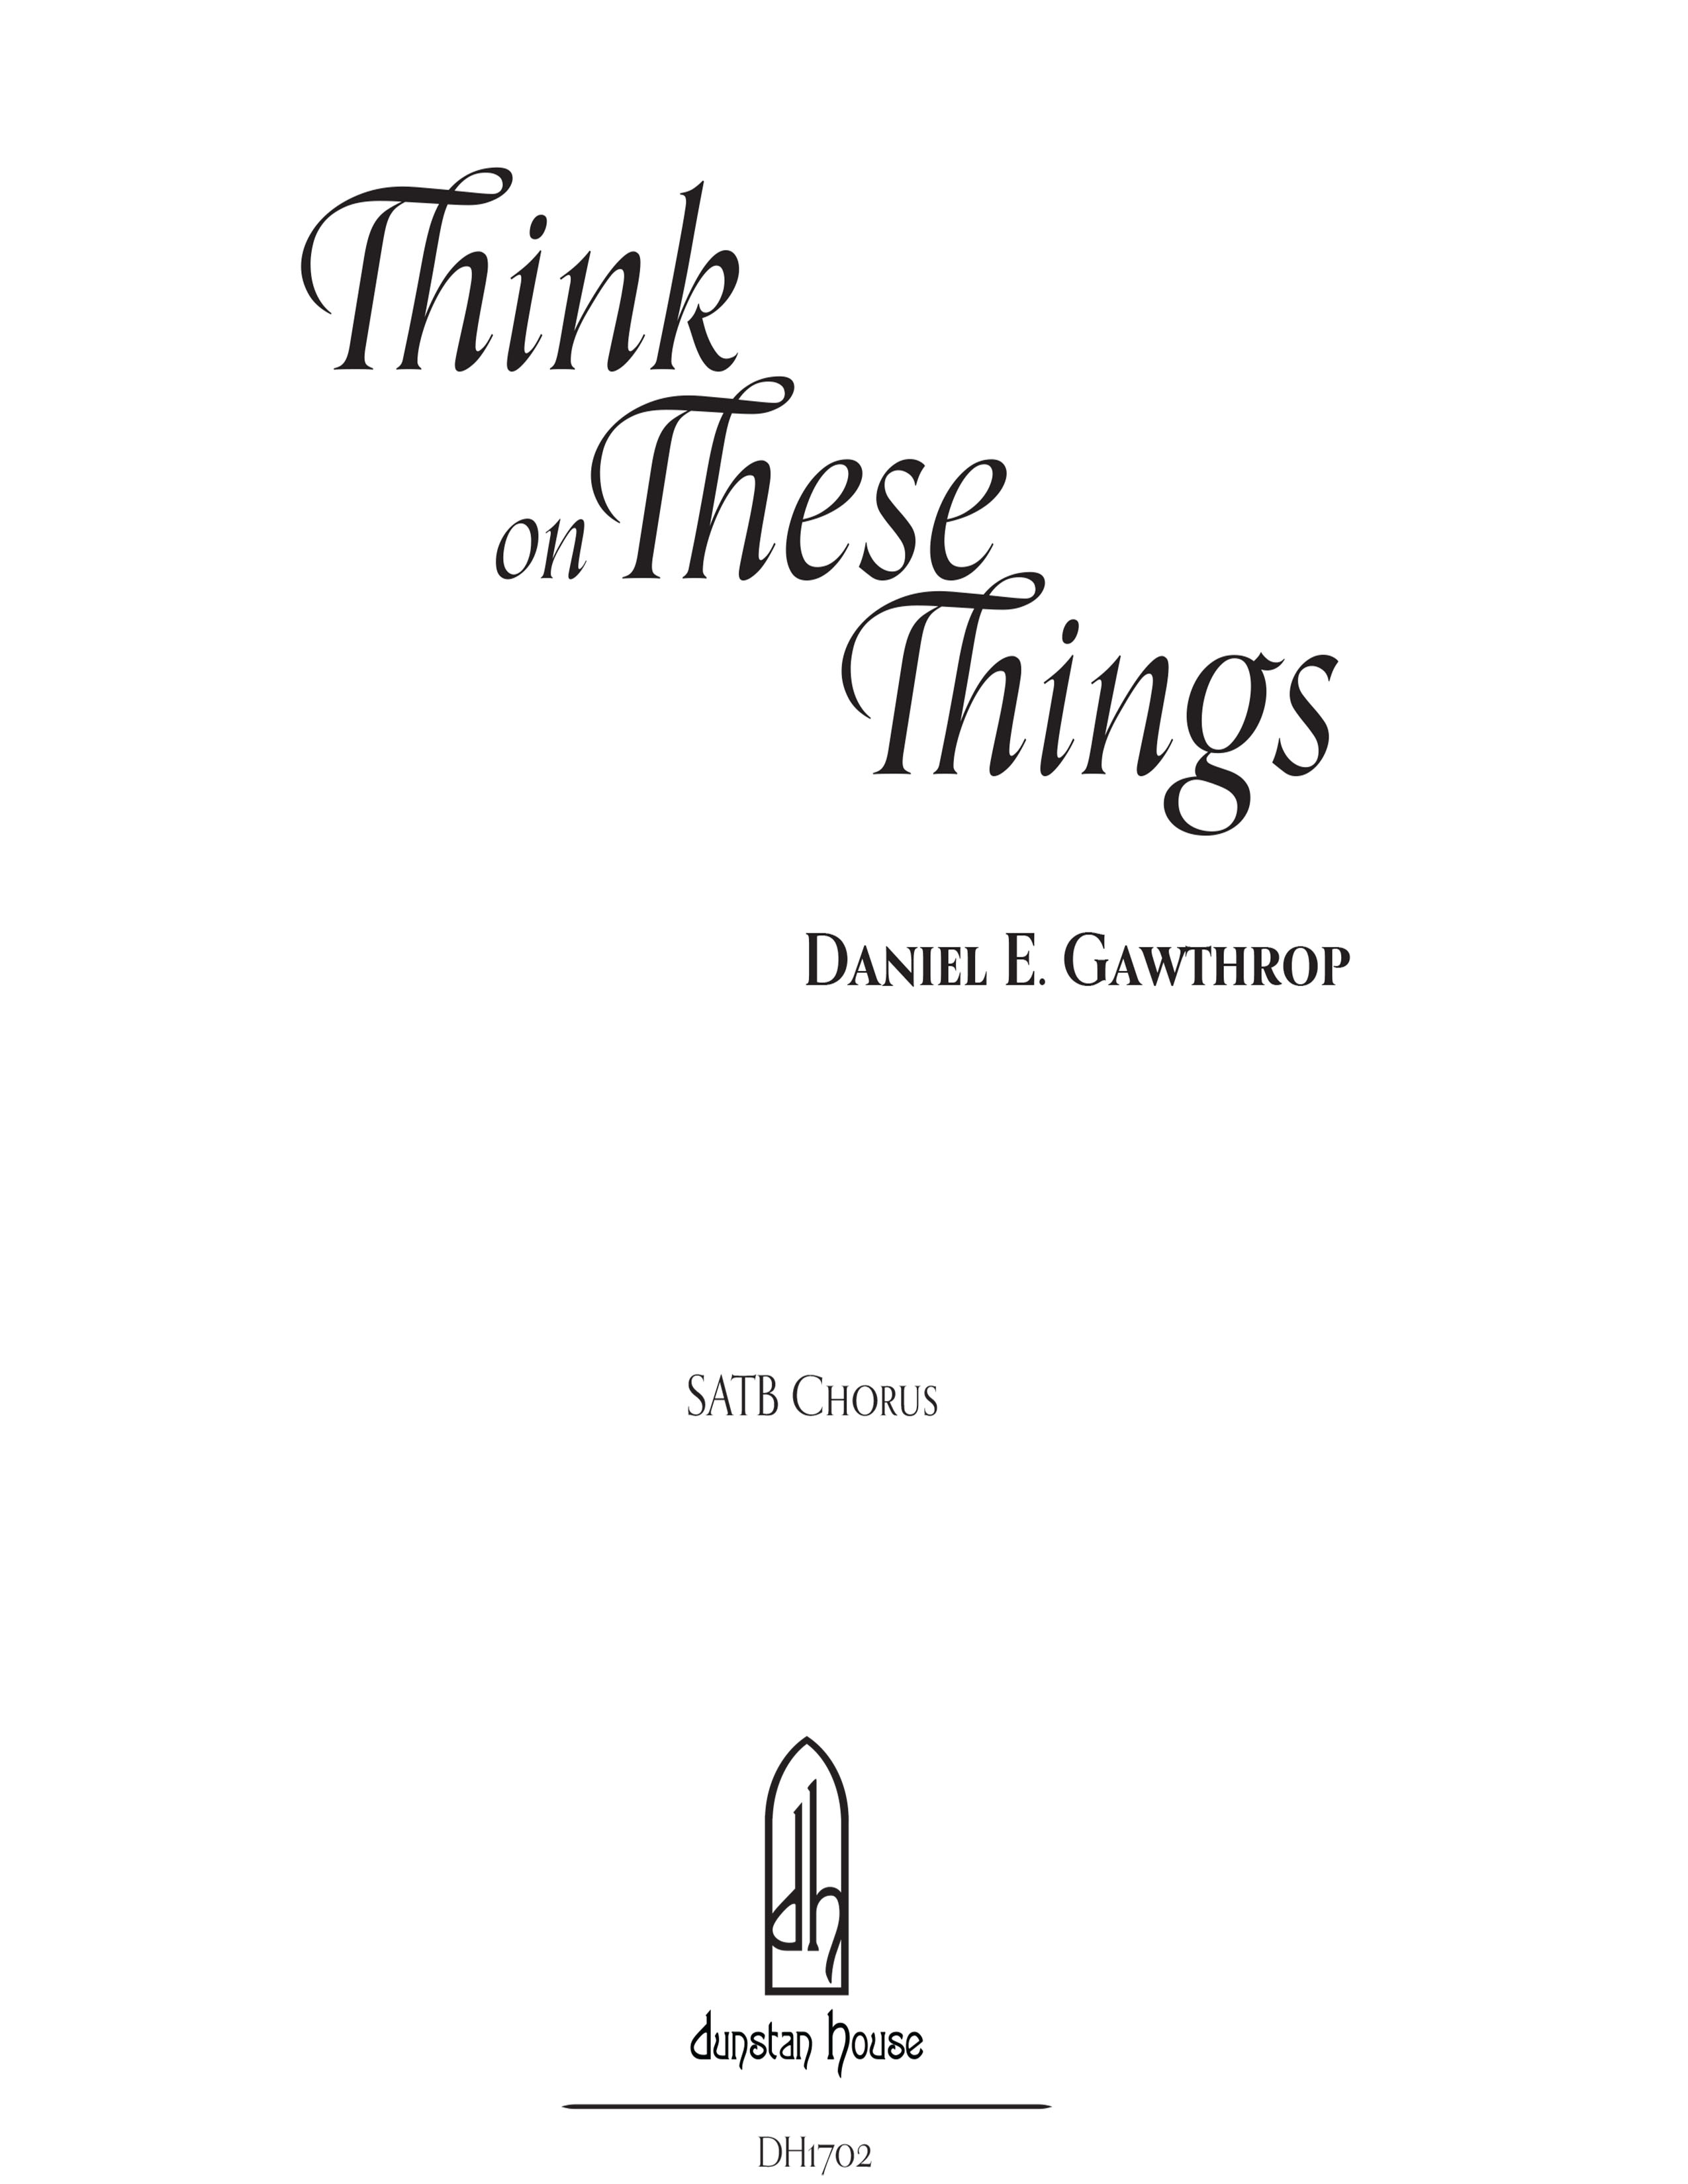 Think on These Things for SATB Chorus (divisi), a cappella